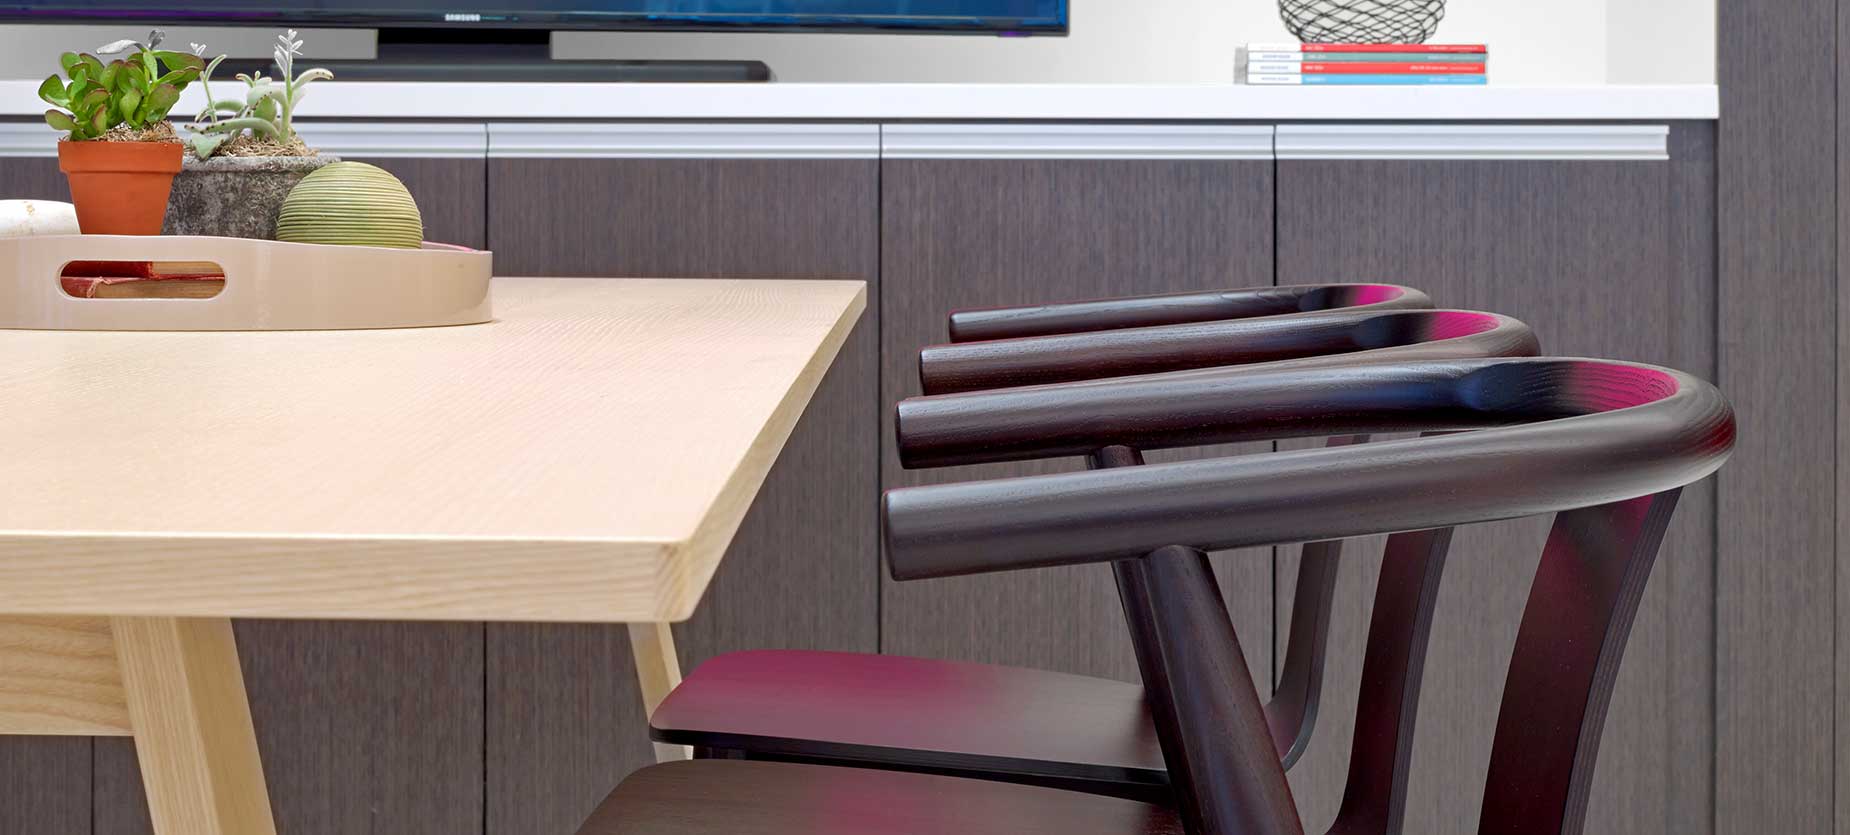 Bac table and chairs from Haworth Collection provide a stylish place for people to gather informally.